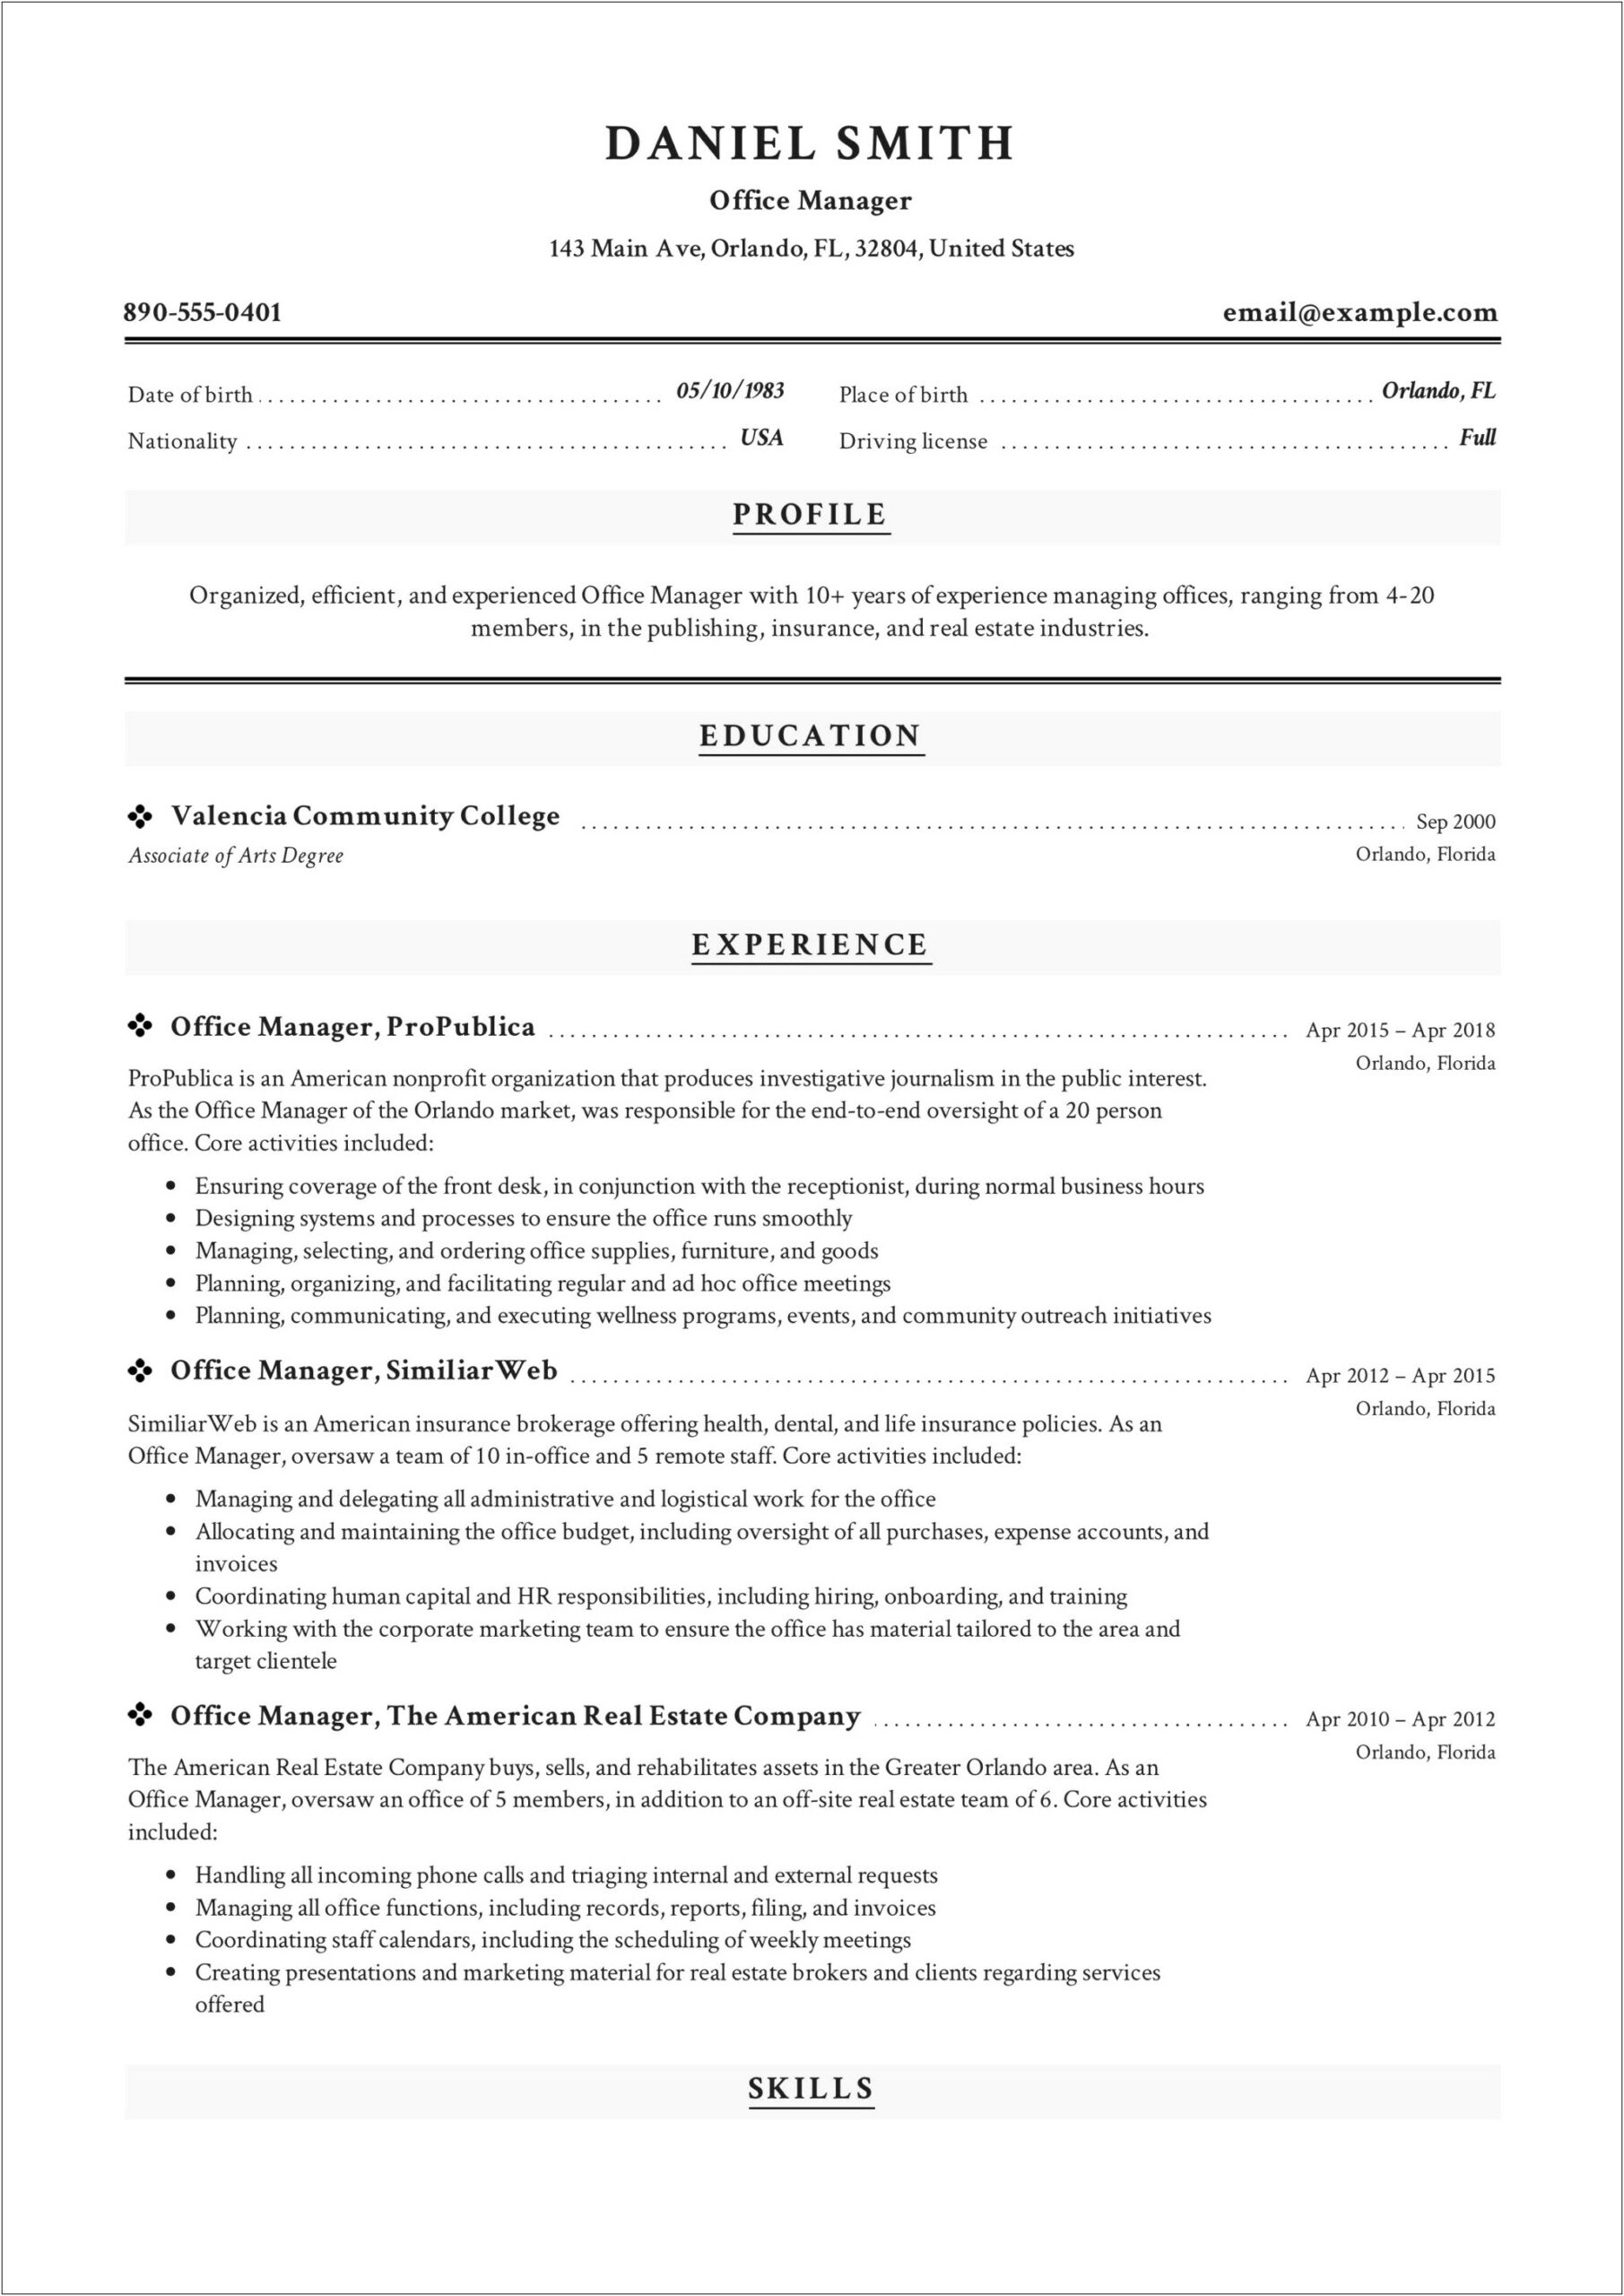 Resume For Office Manager Sample